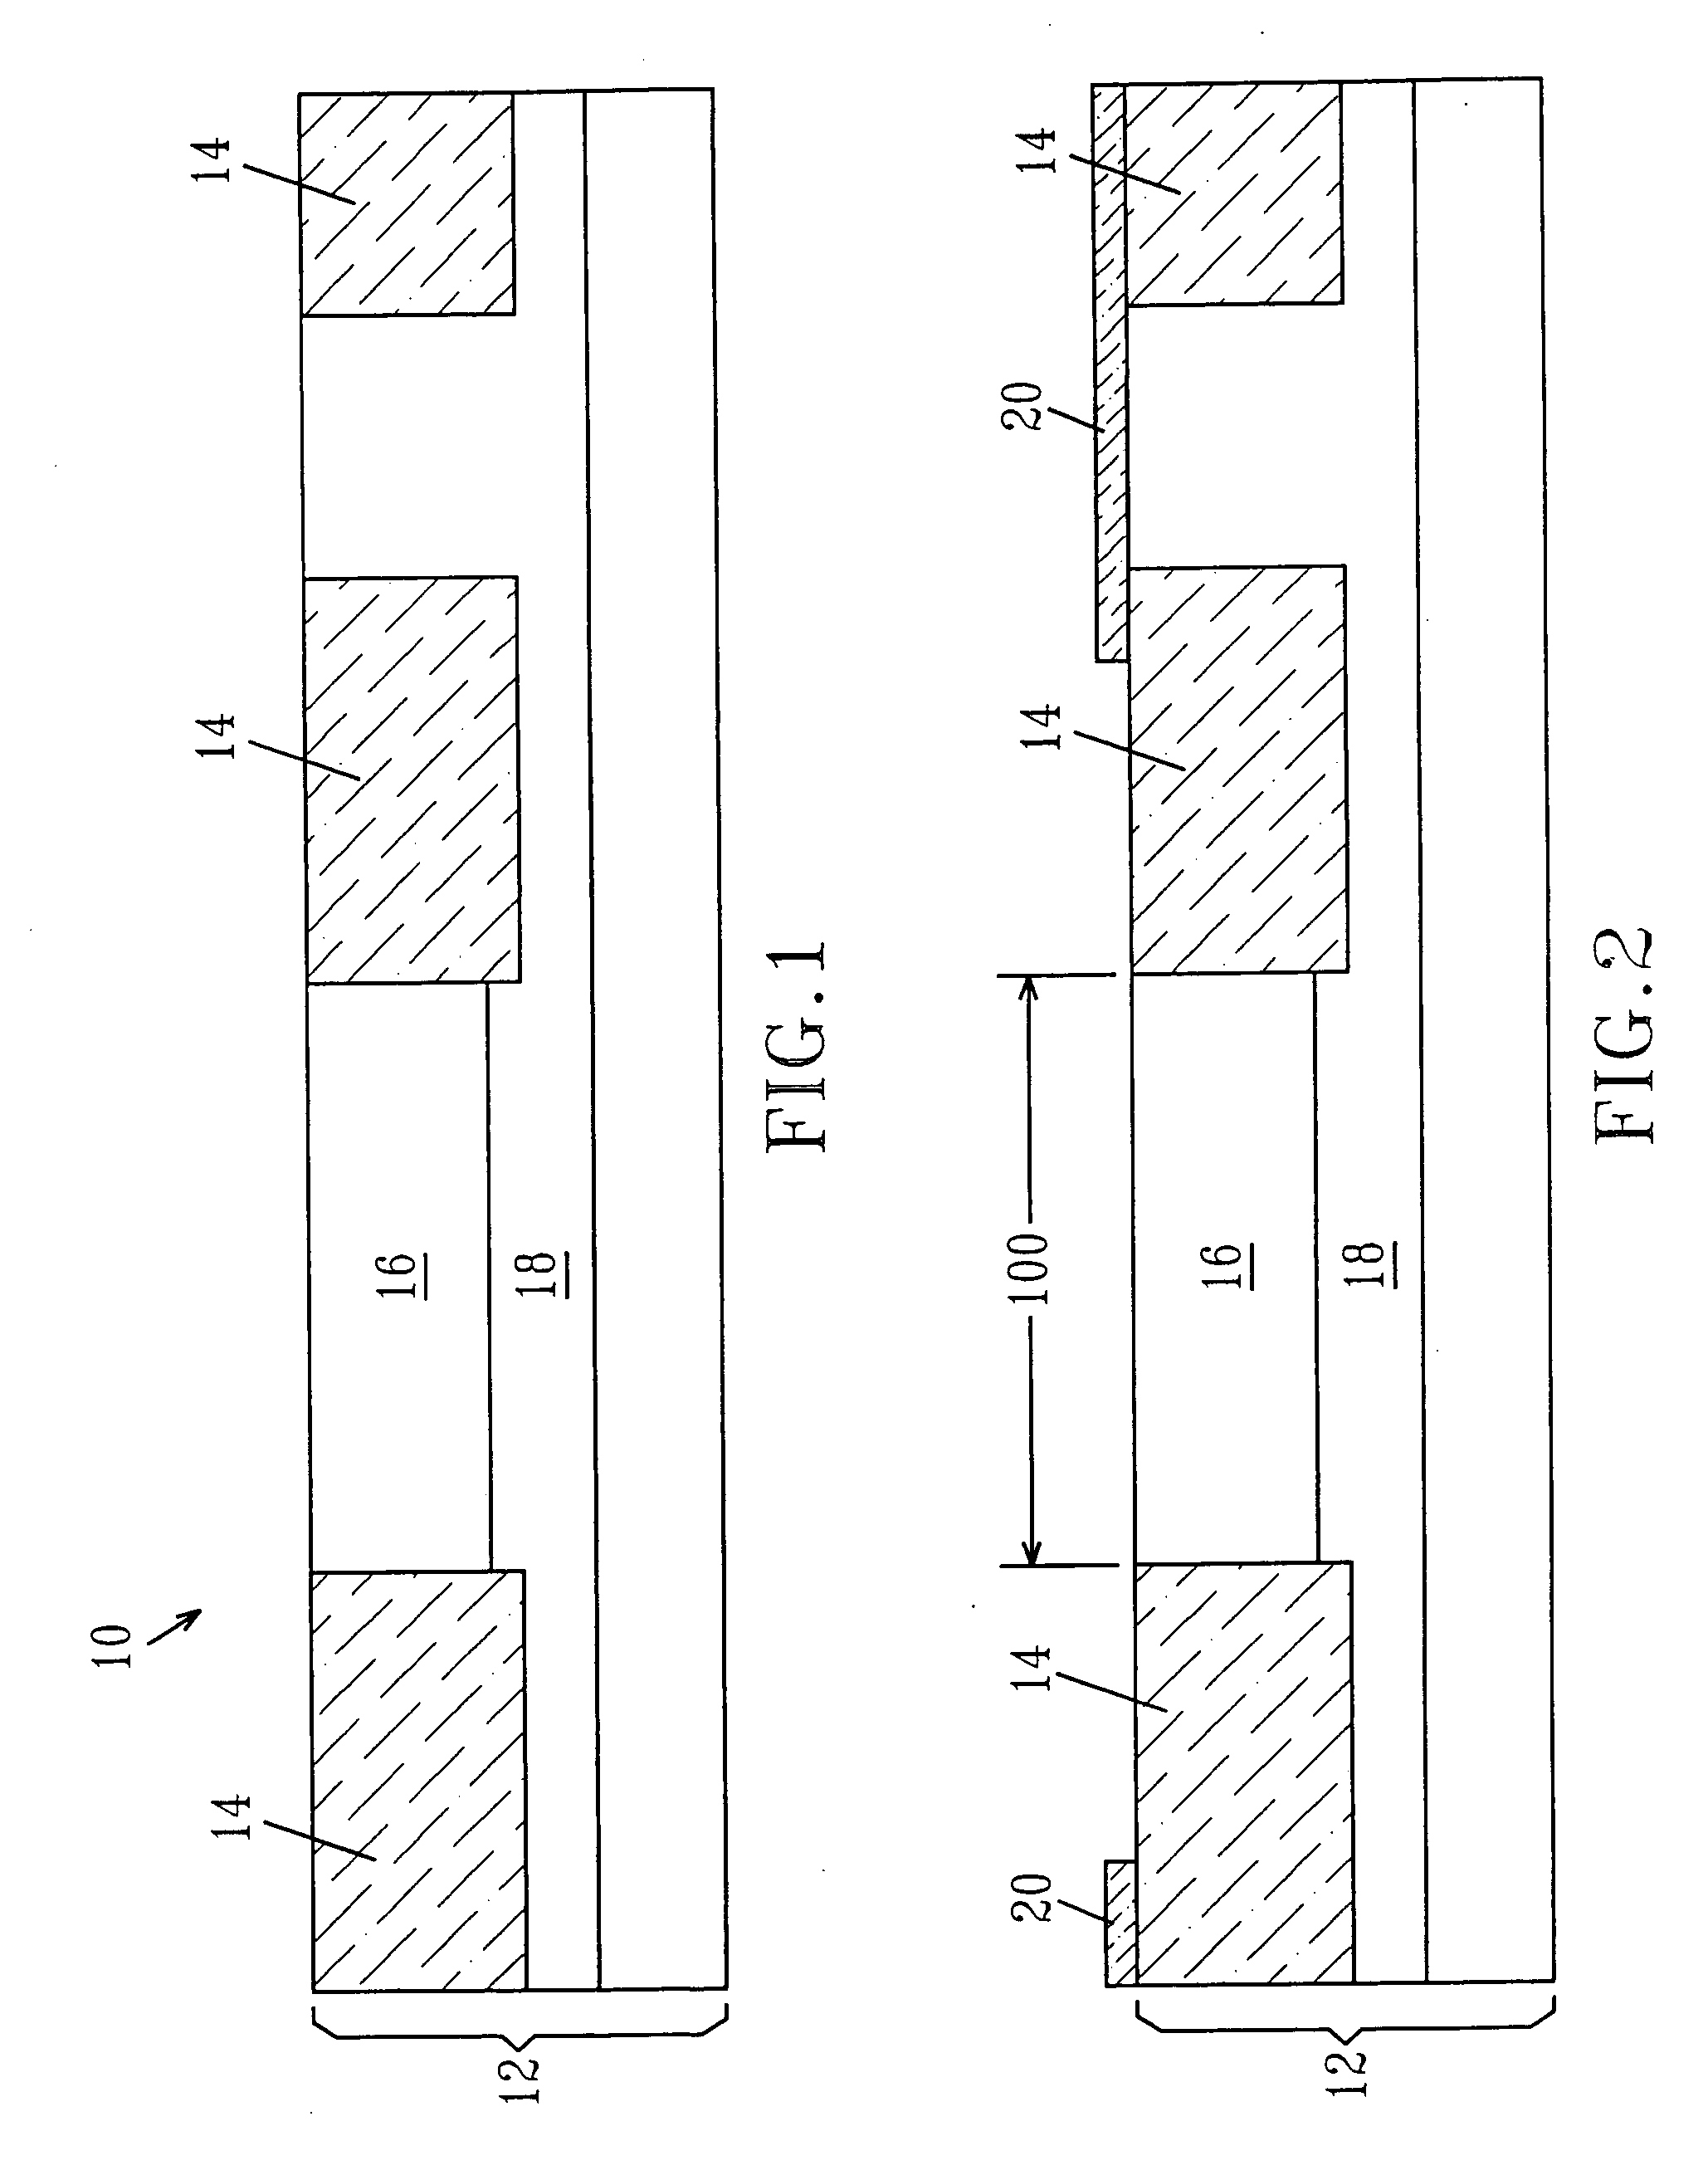 Bipolar transistor with collector having an epitaxial Si:C region